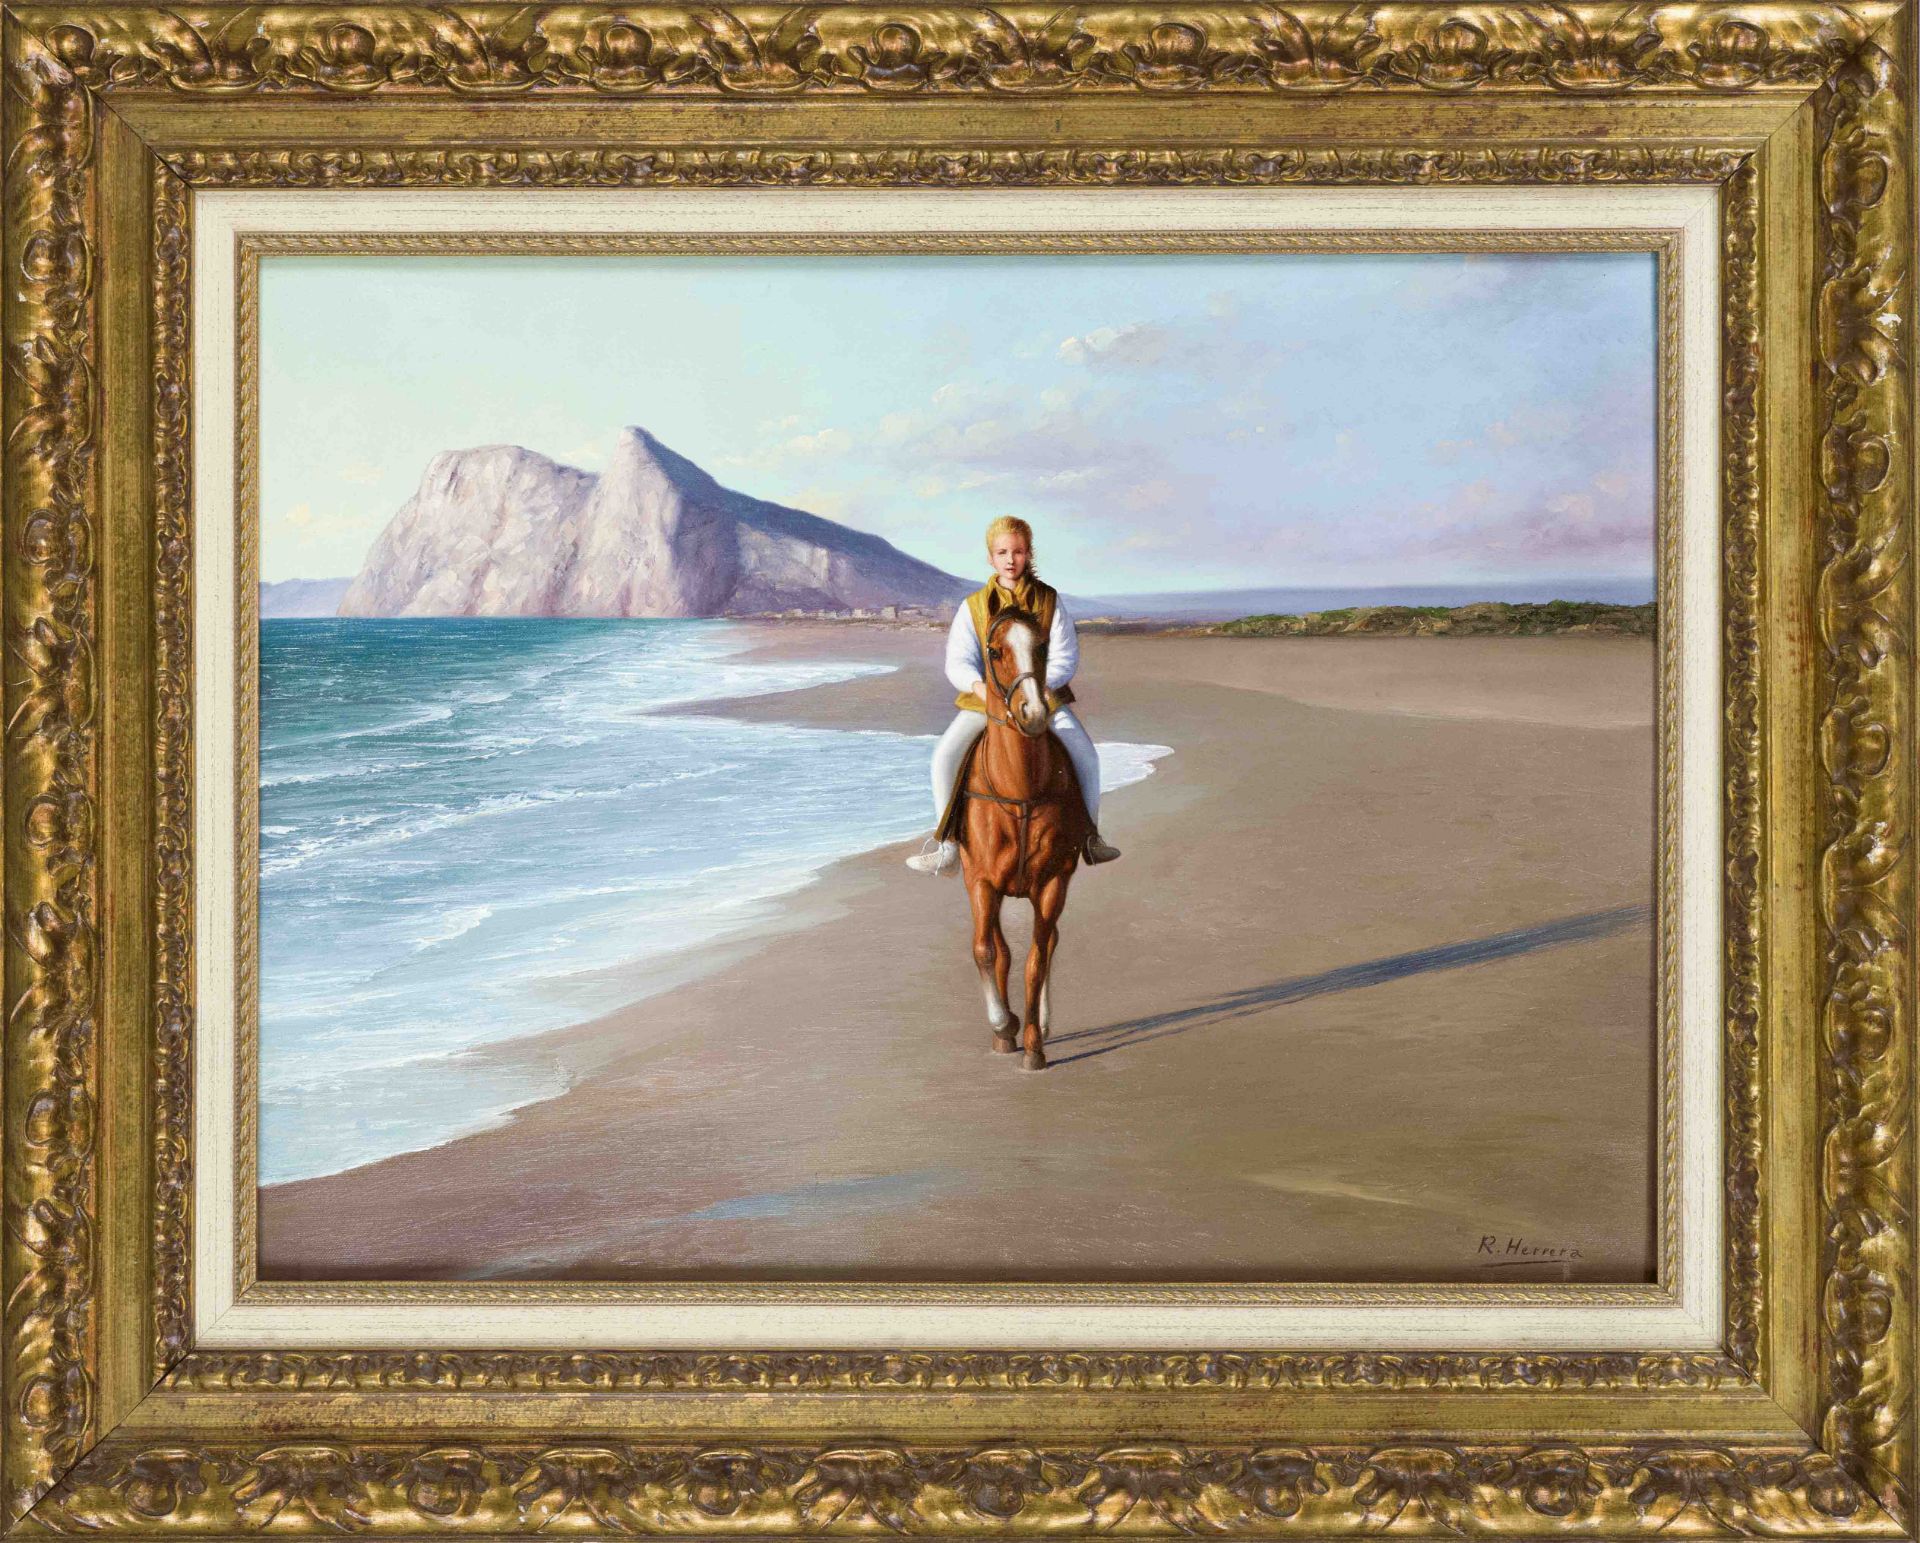 R. Herrera, late 20th century, Horsewoman on a lonely beach, oil on canvas, signed lower right, 54 x